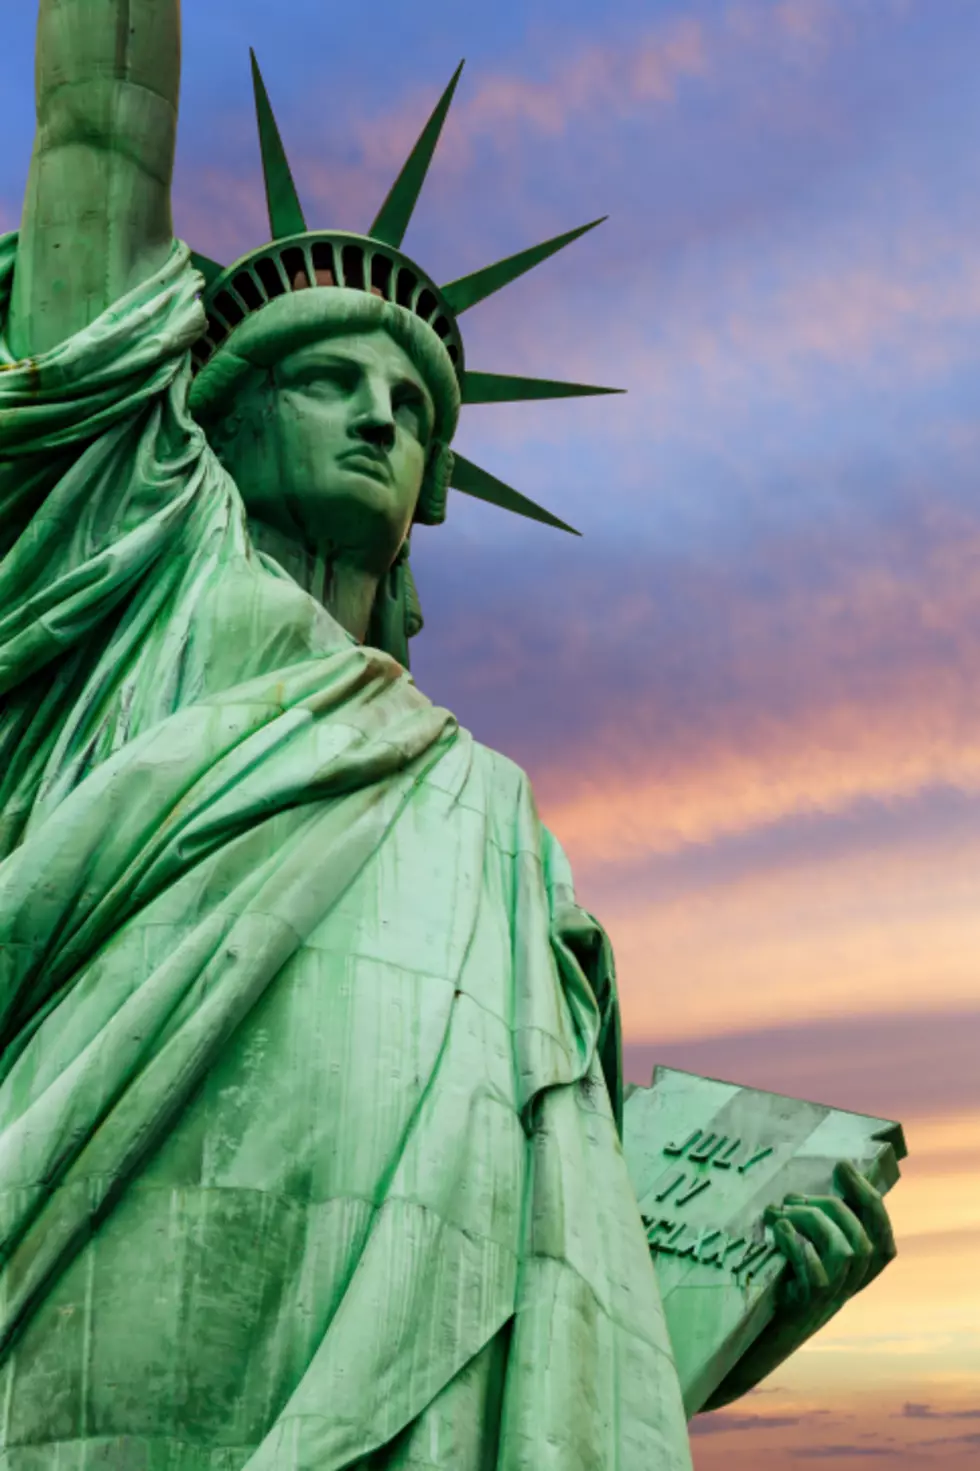 Everything You Ever Wanted To Know About The Statue of Liberty